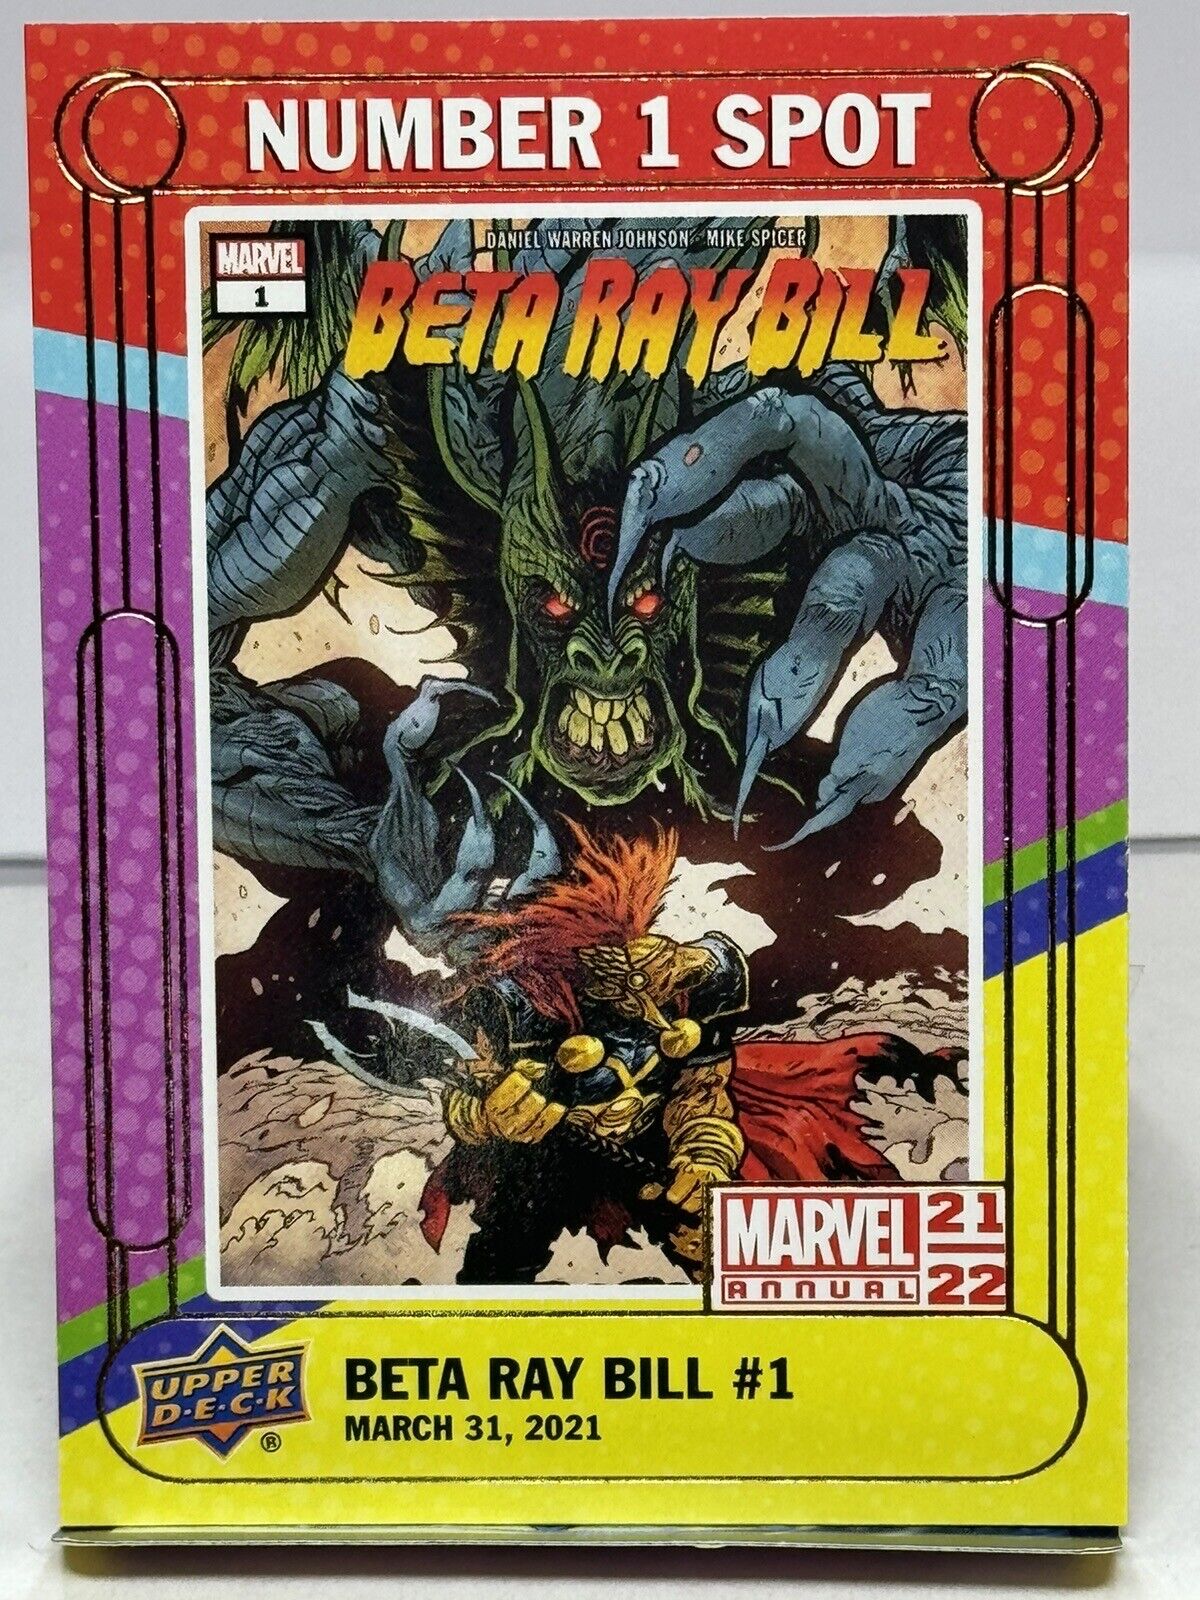 2021-2022 Marvel Annual Trading Card #N1S-13 Beta Ray Bill #1 Number 1 Spot